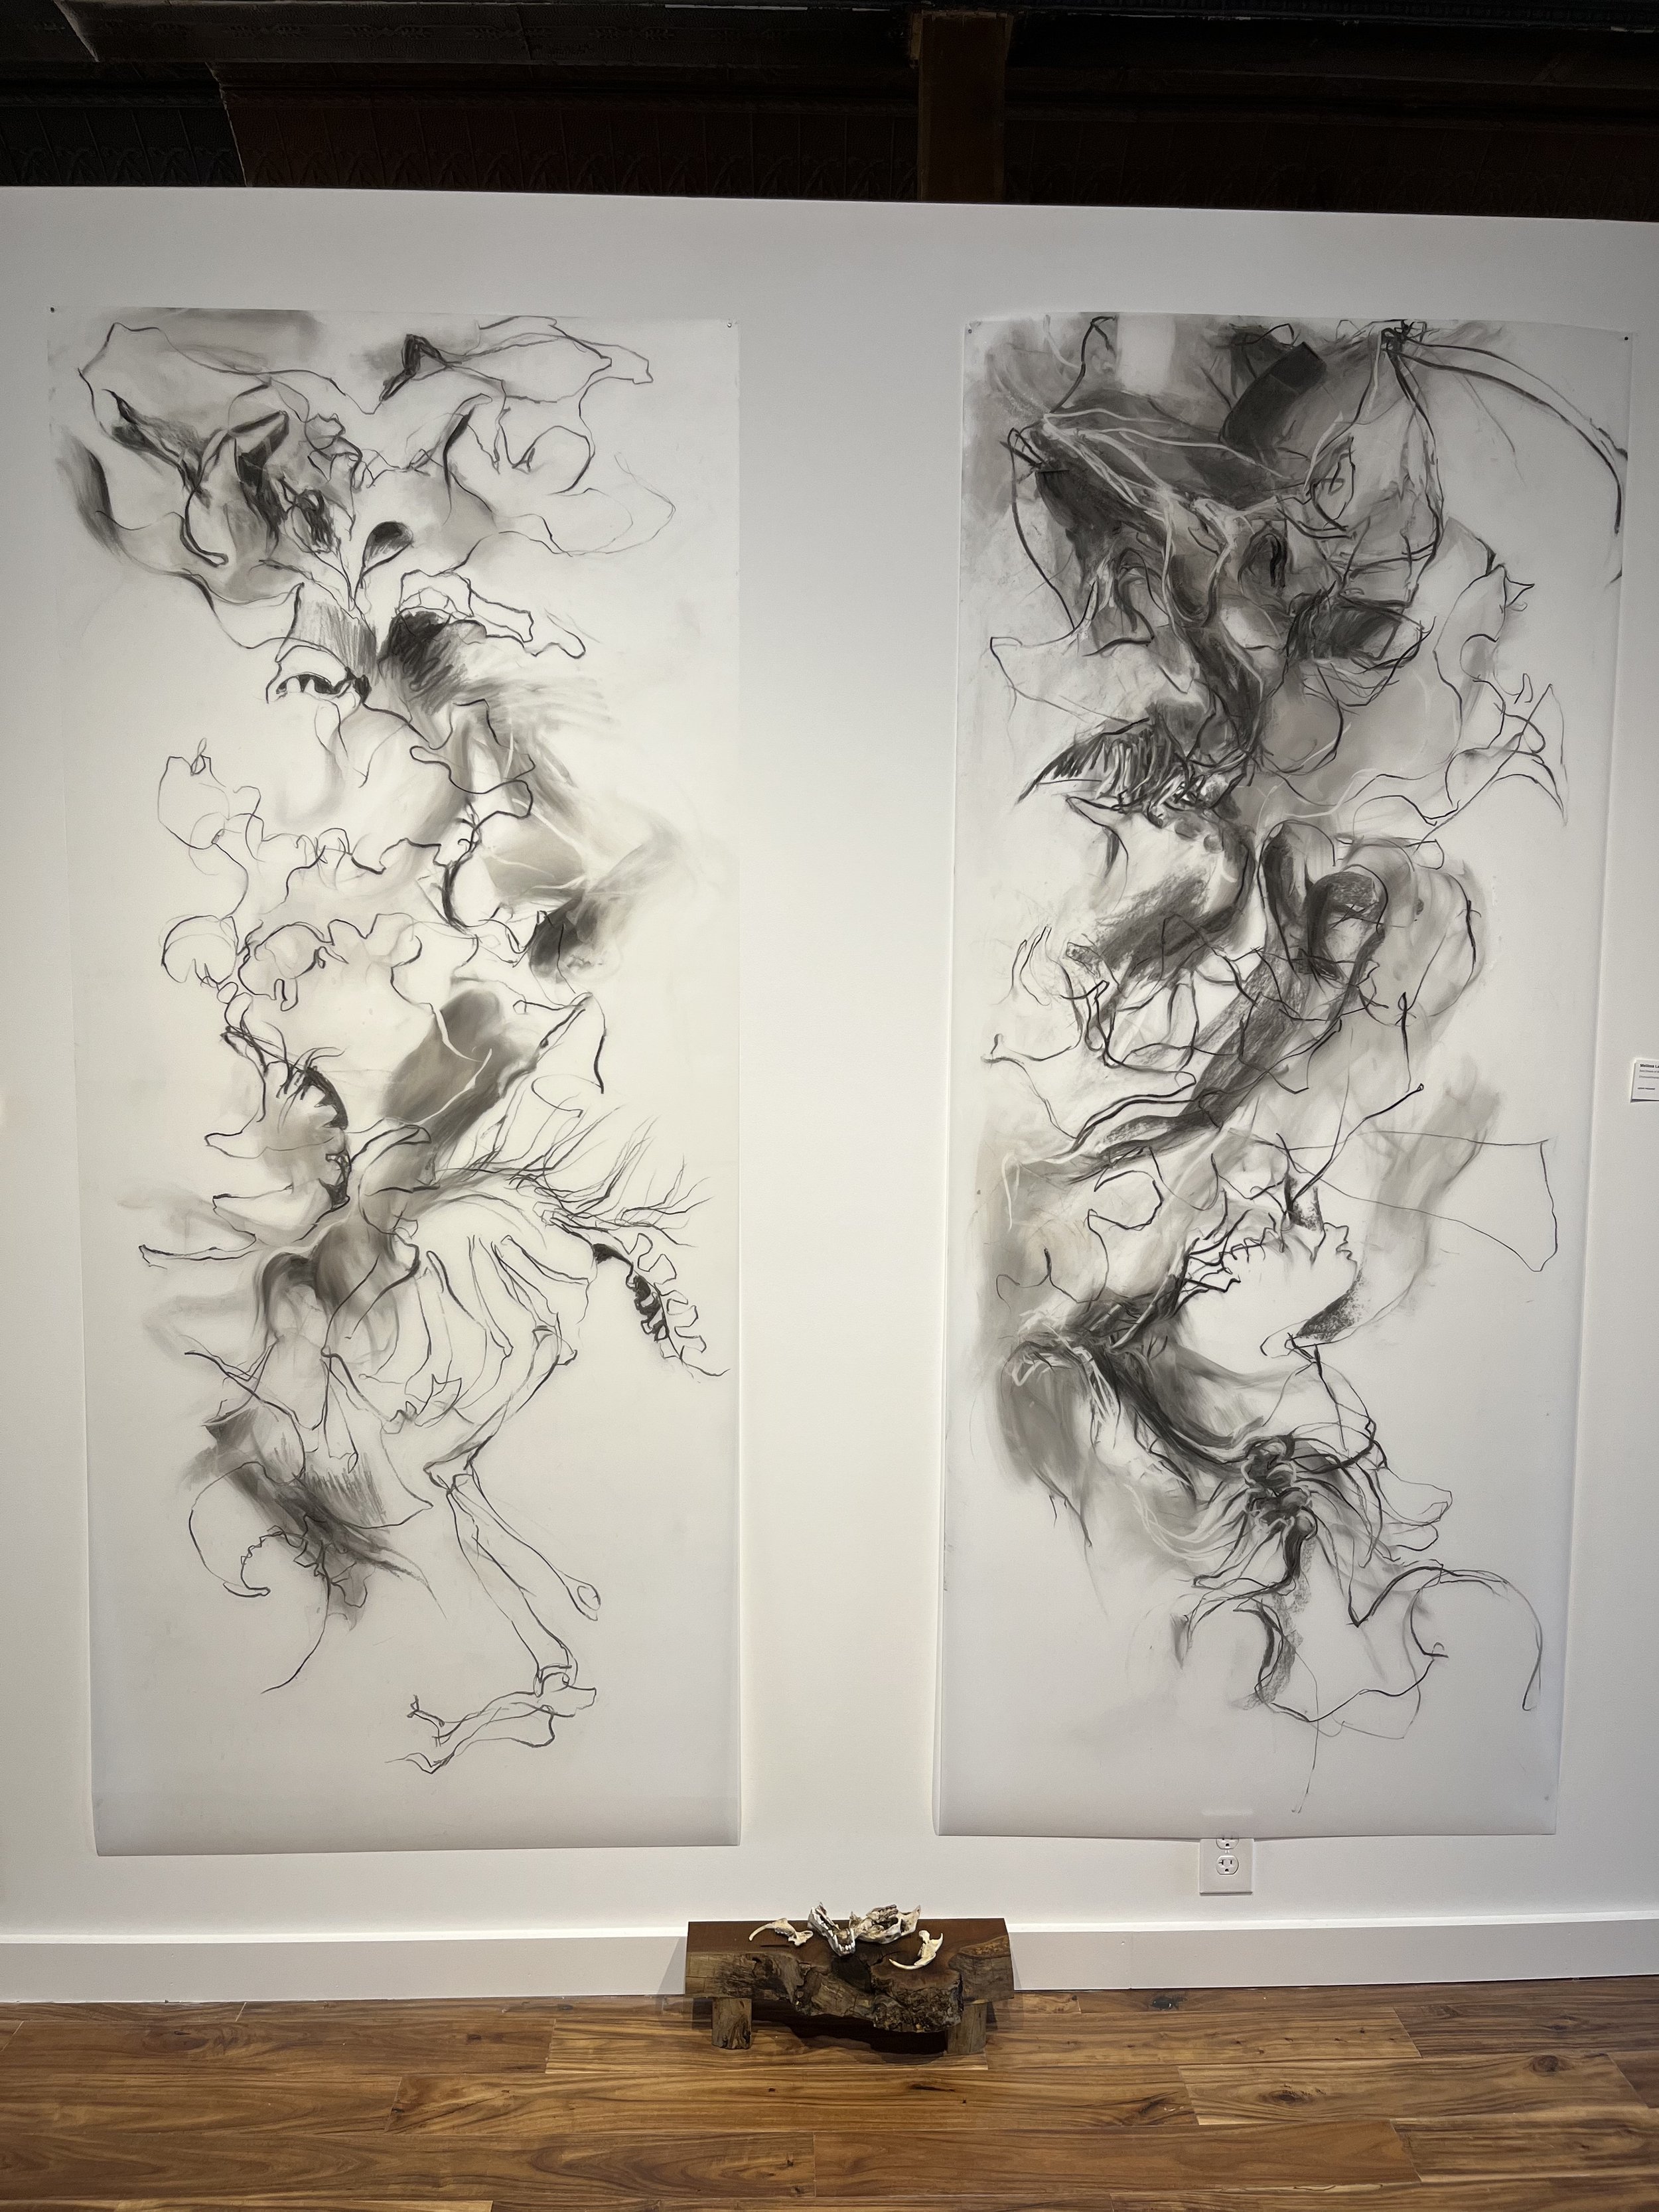  Artist: Melissa Lang  Title: “The Porcupine Ate Her Bed” (Drawing on the left)  	Medium: Charcoal/mylar  	Size: 84 x 36"  	Year: 2022  Price: upon request  Artist: Melissa Lang  Title: Bats Dream of Butterflies (Drawing on the right)  	Medium: Charc